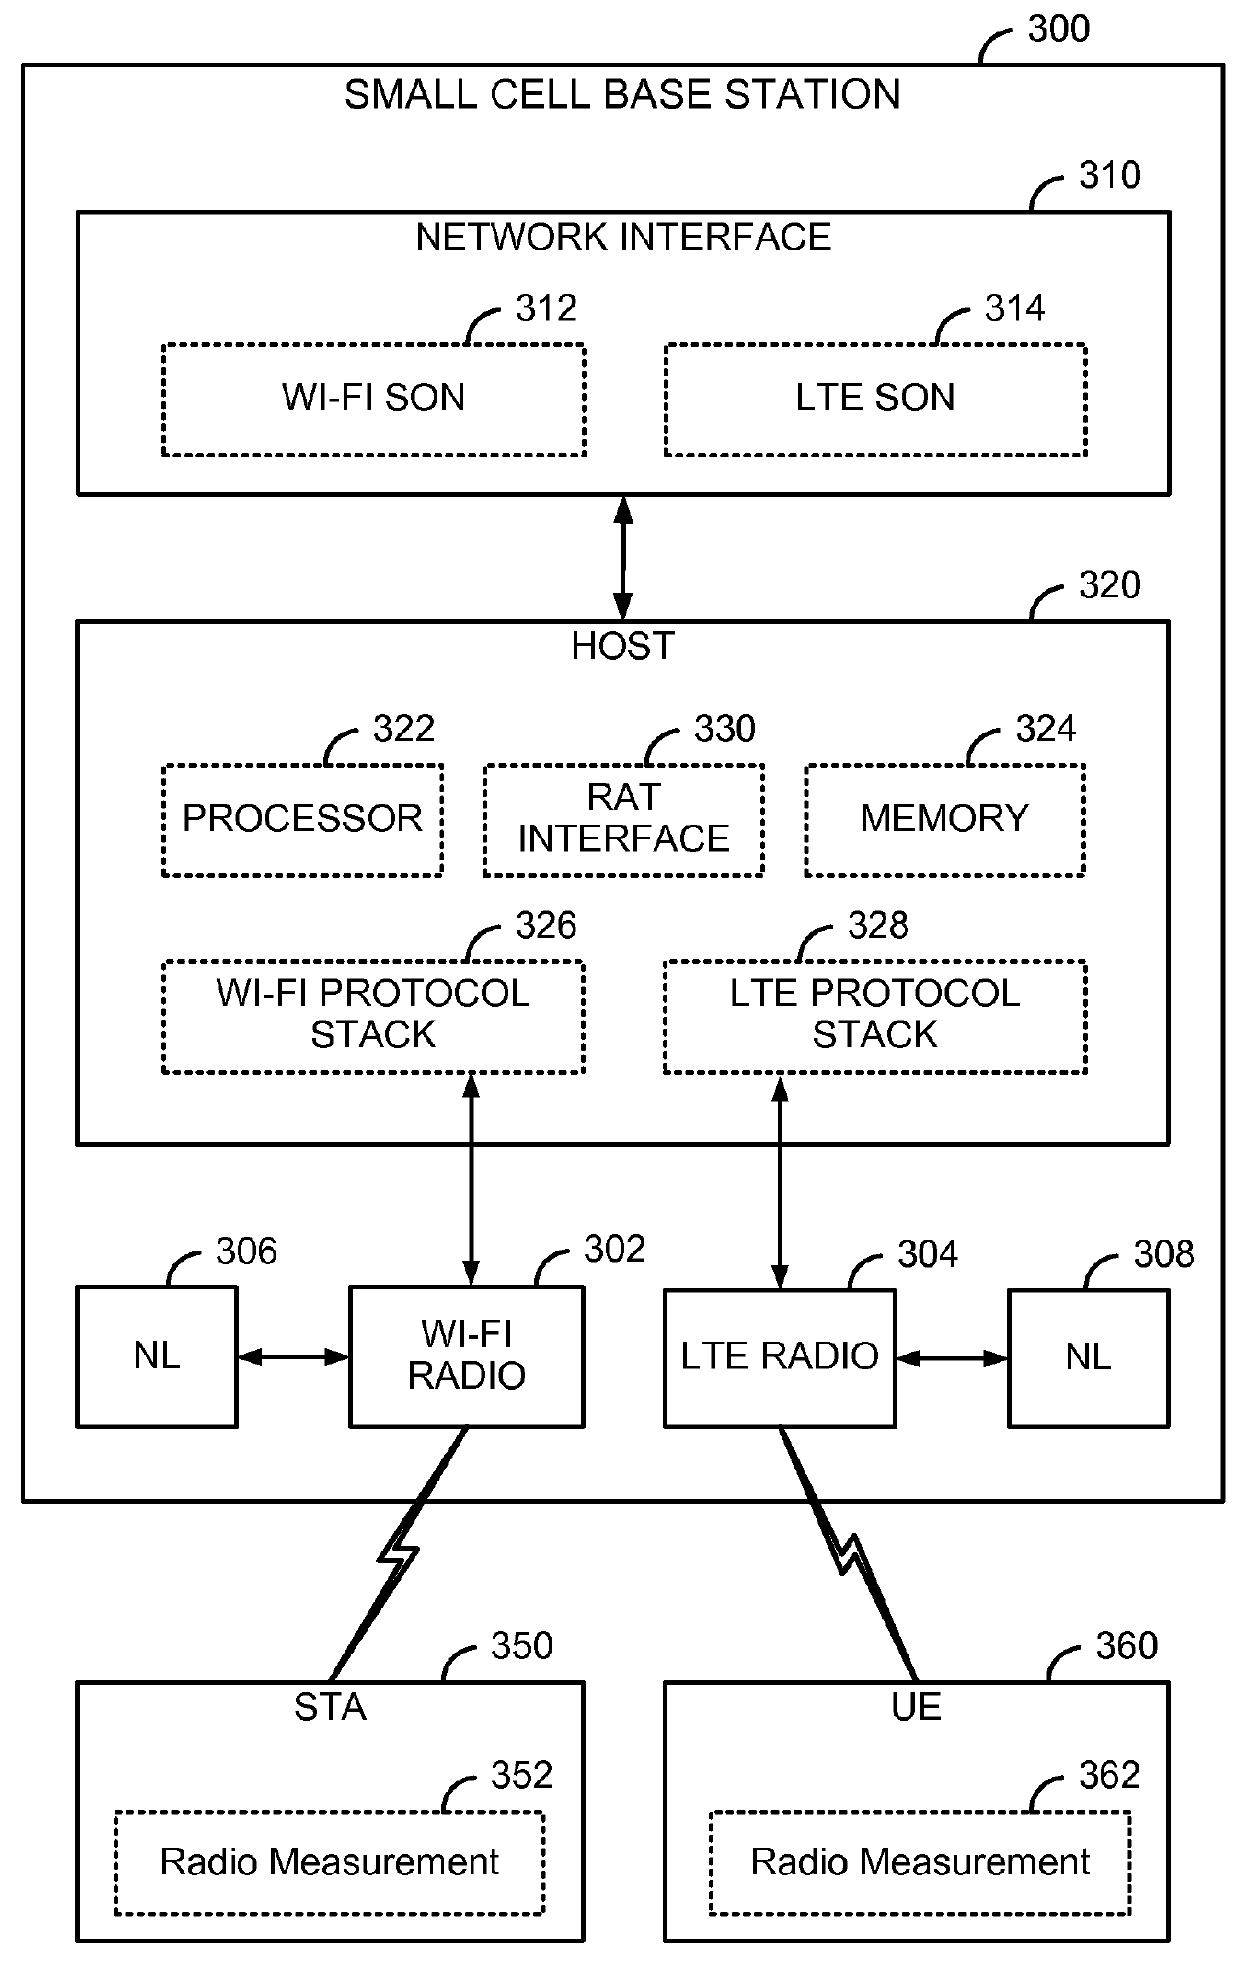 Cson-aided small cell load balancing based on backhaul information